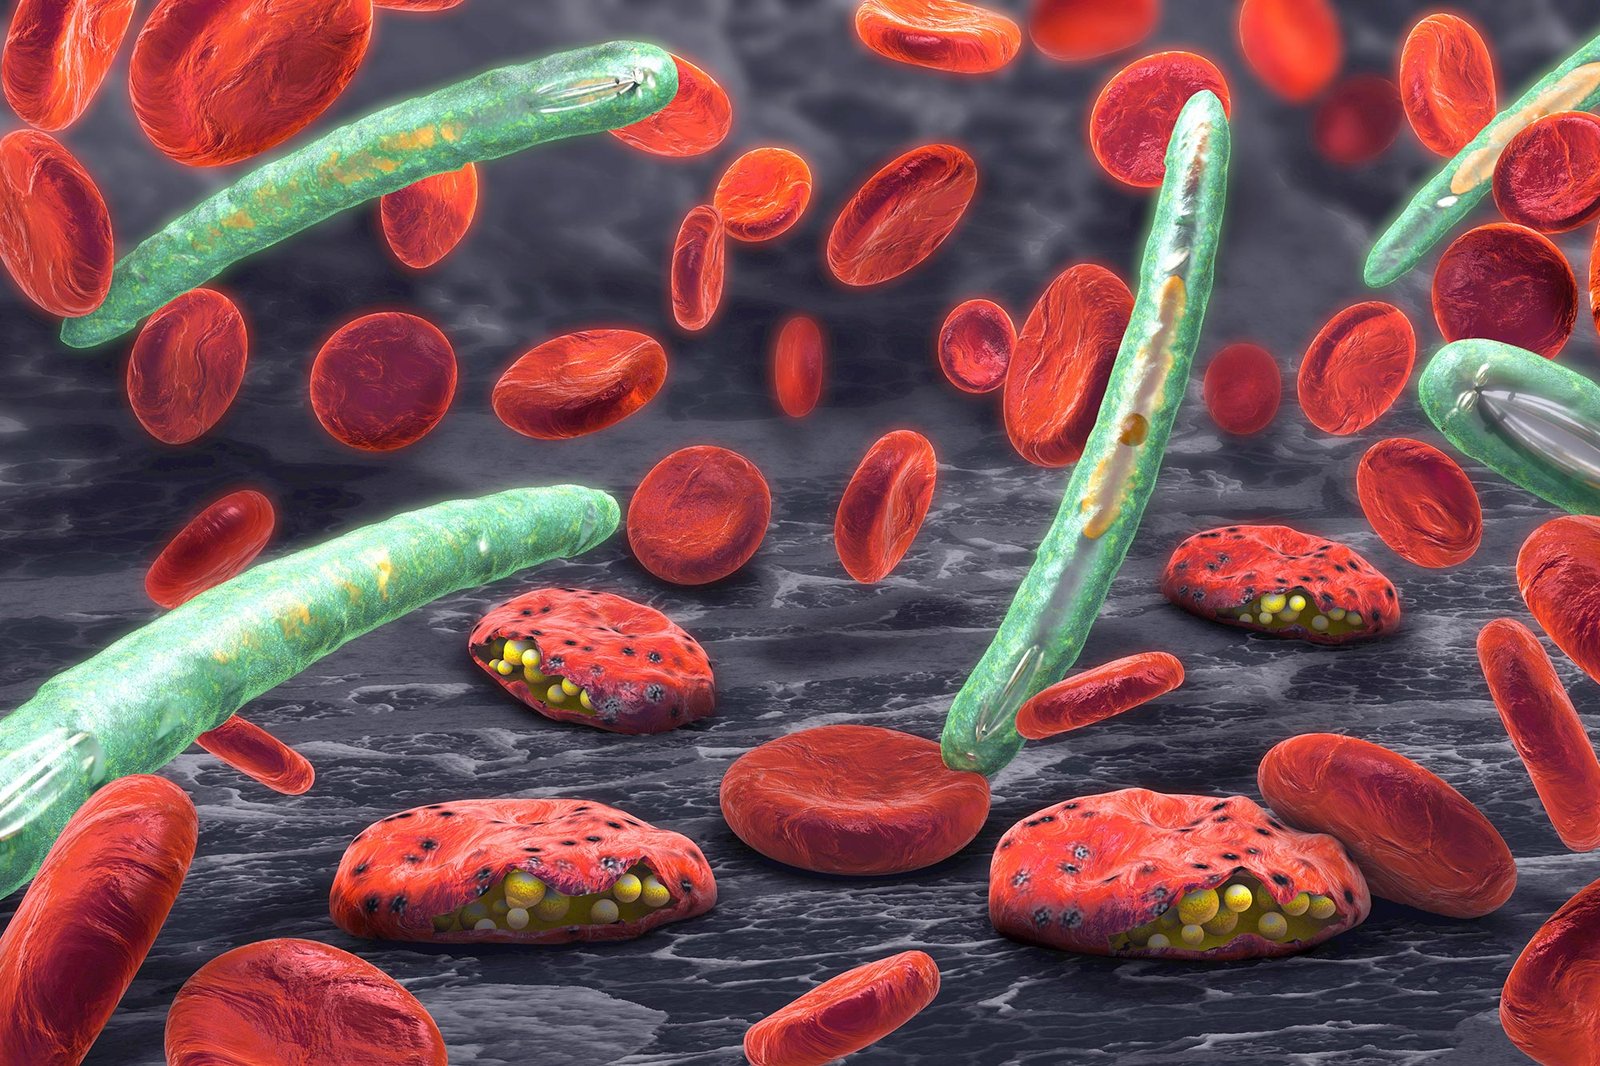 Newly Discovered Malaria Parasites Evade Detection and Treatment